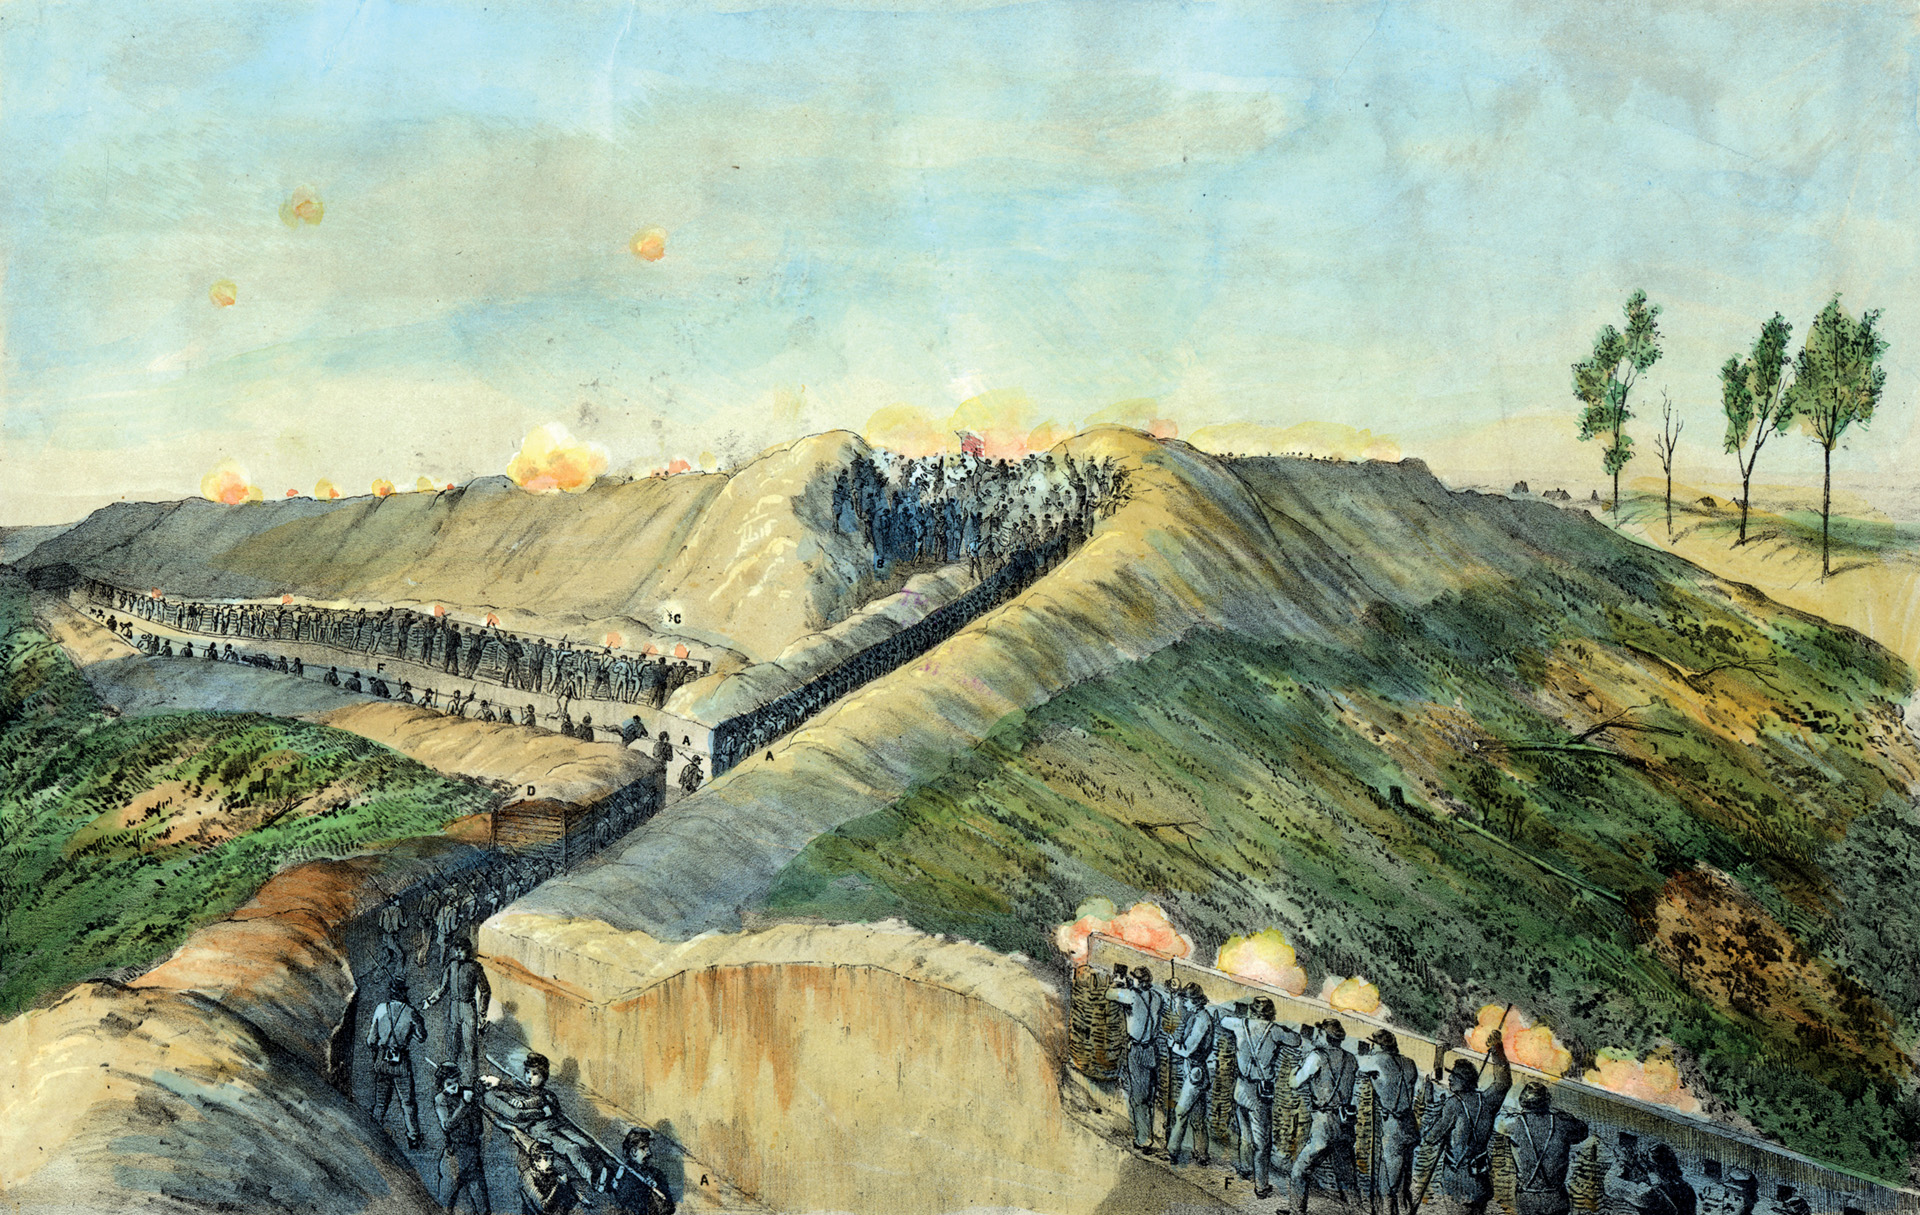 On June 25, 1863, the Union Army detonated 2,200 pounds of black powder in a mine beneath the 3rd Louisiana Redan. An immediate assault afterward by Maj. Gen. James B. McPherson’s XVII Corps failed because the Yankees could not advance out of the crater.